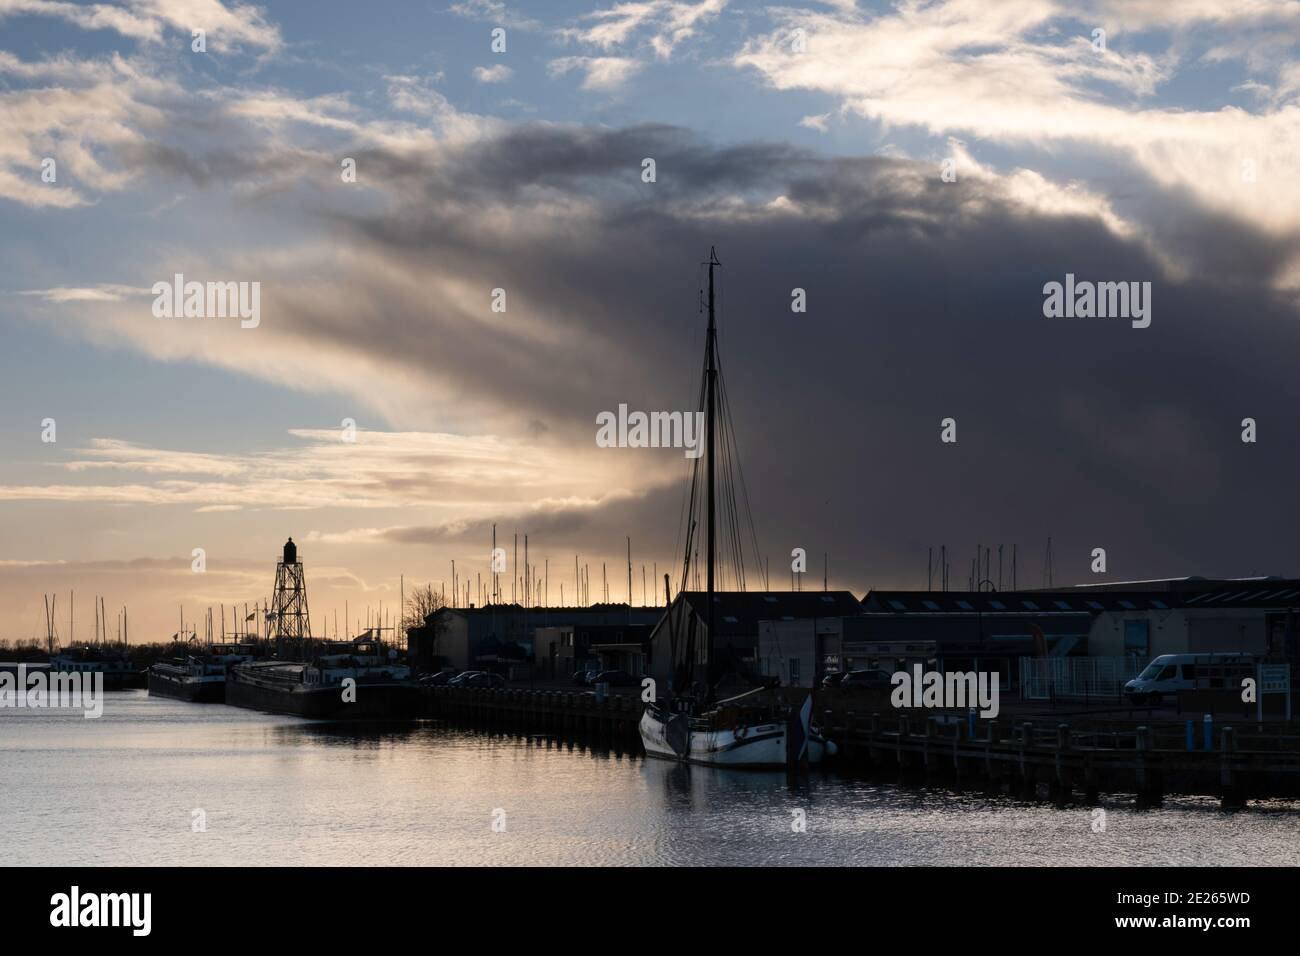 Outer harbor of Lemmer in the Netherlands with the metal lighthouse on the left and a Lemster Barge on the right with beautiful threatening clouds Stock Photo